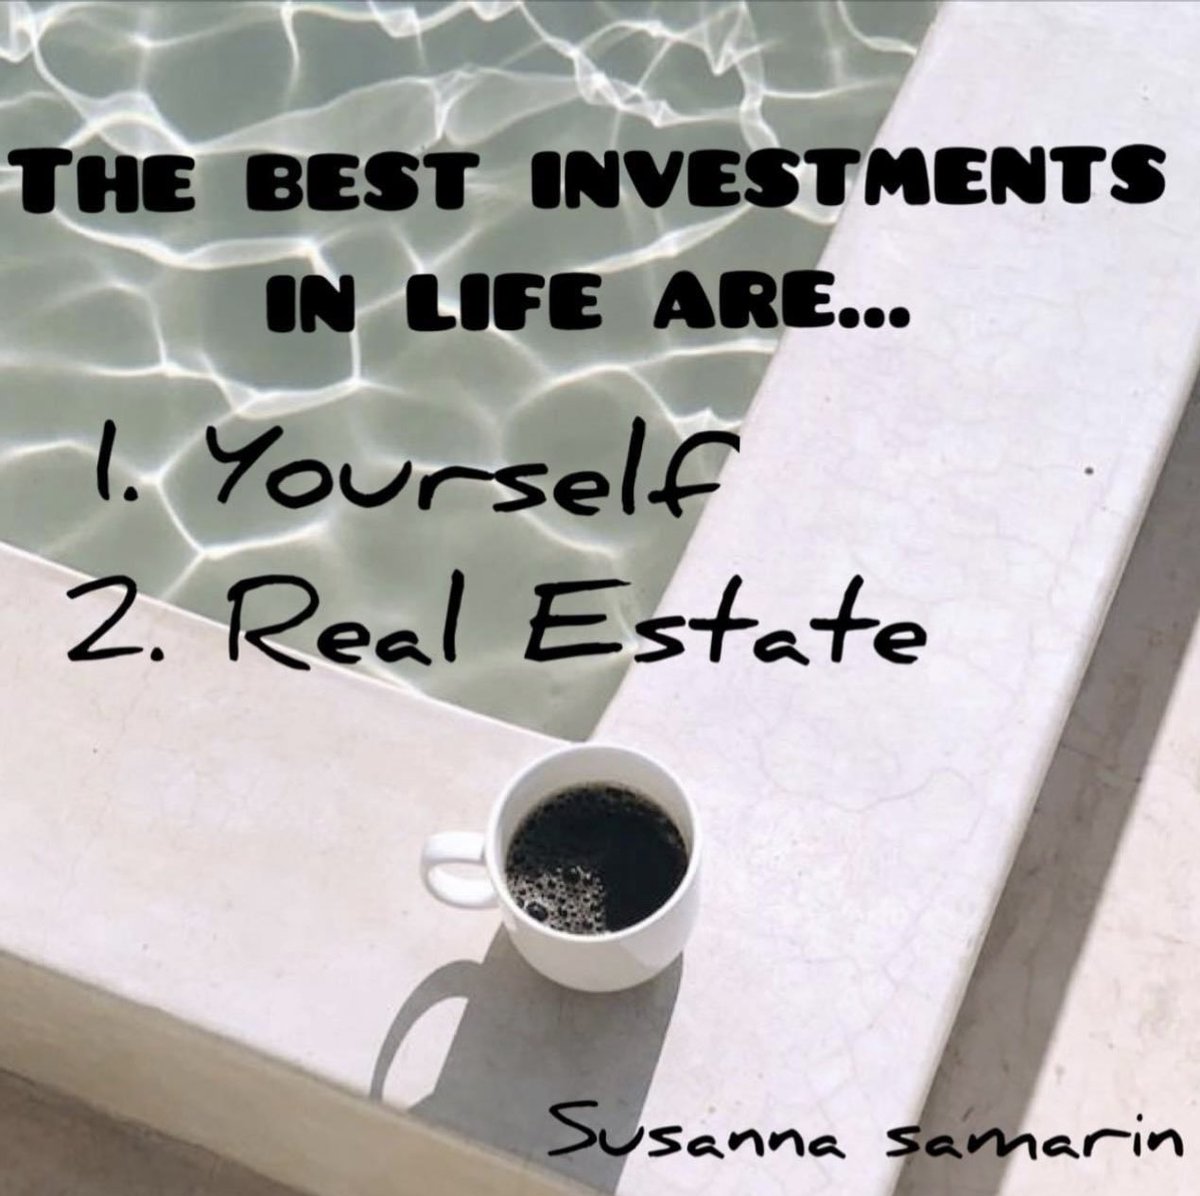 Don’t wait to buy real estate…buy real estate and wait✊🌅#investment #realestate #londonproperties #womenofrealestate